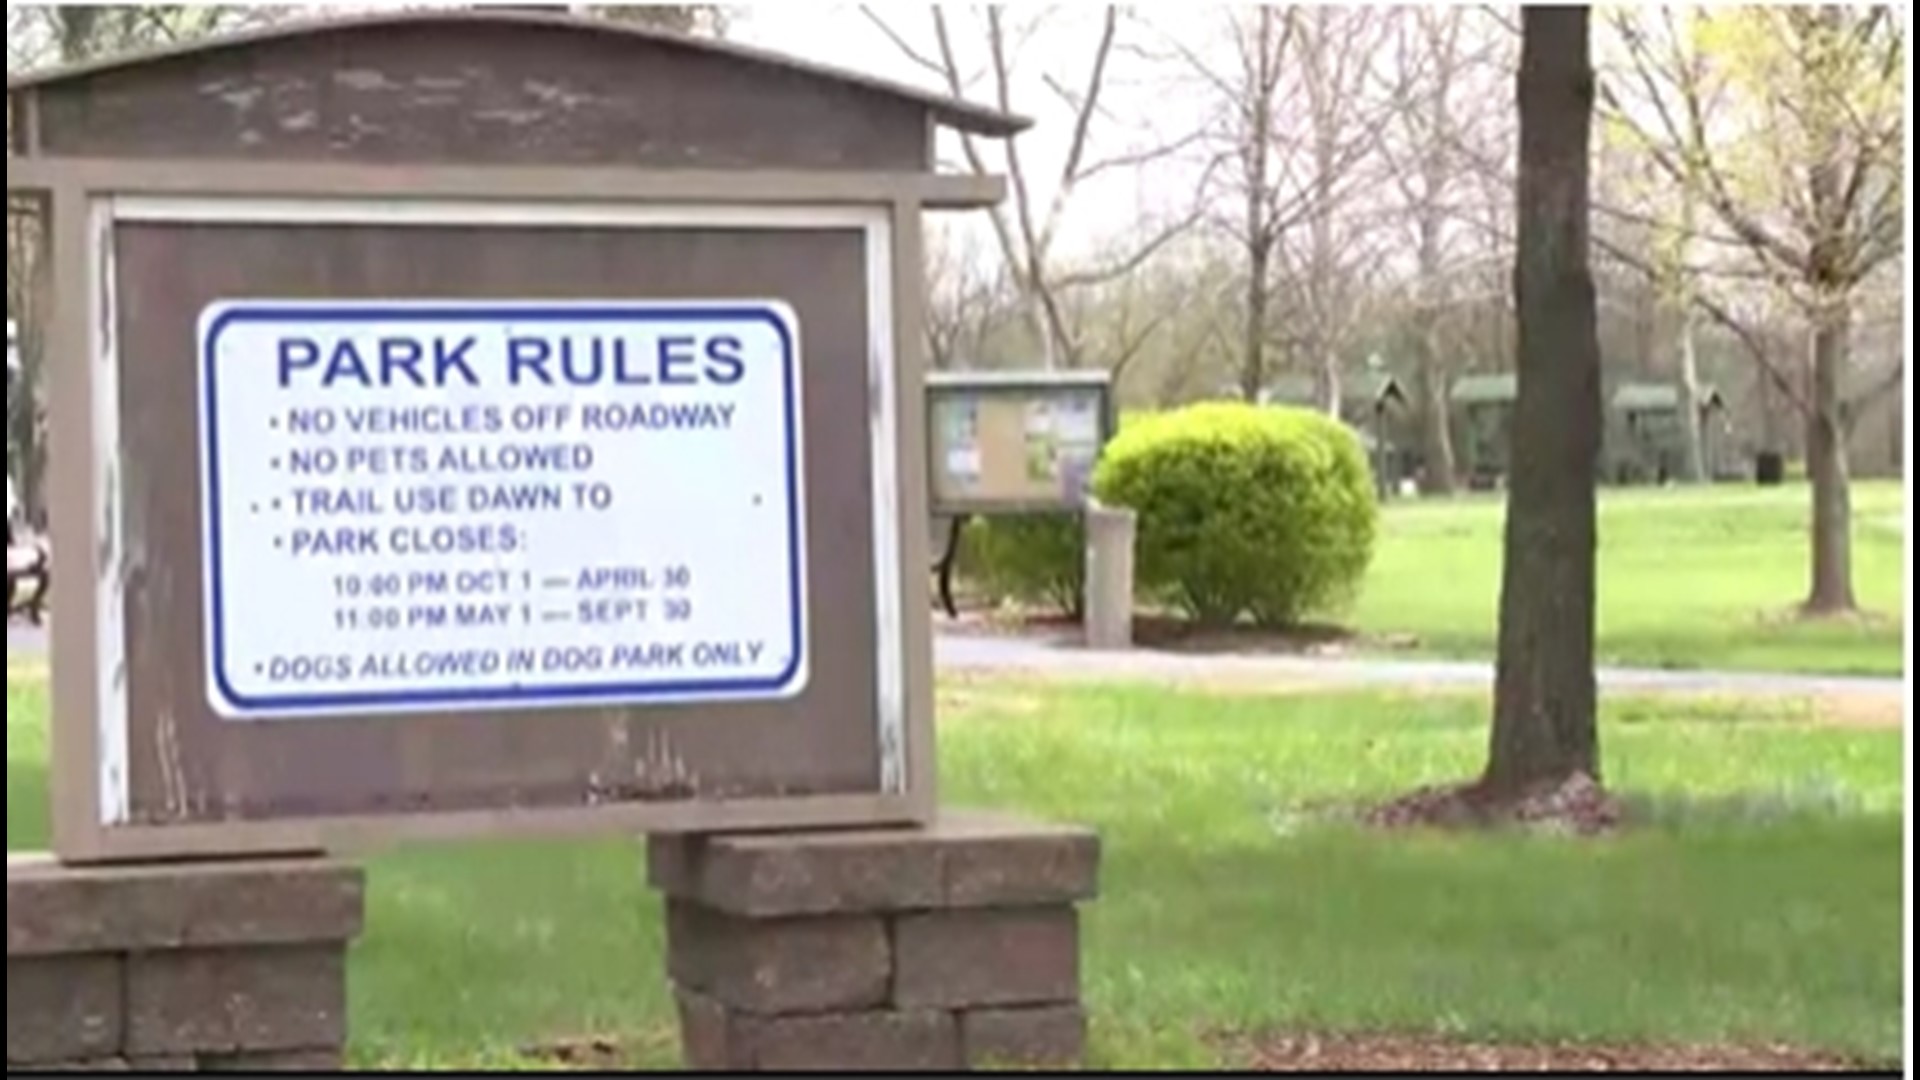 Fairview Heights police said about 500 teens were "unruly and using illegal drugs" in Moody Park over the weekend. Neighbors who saw the teens said otherwise.